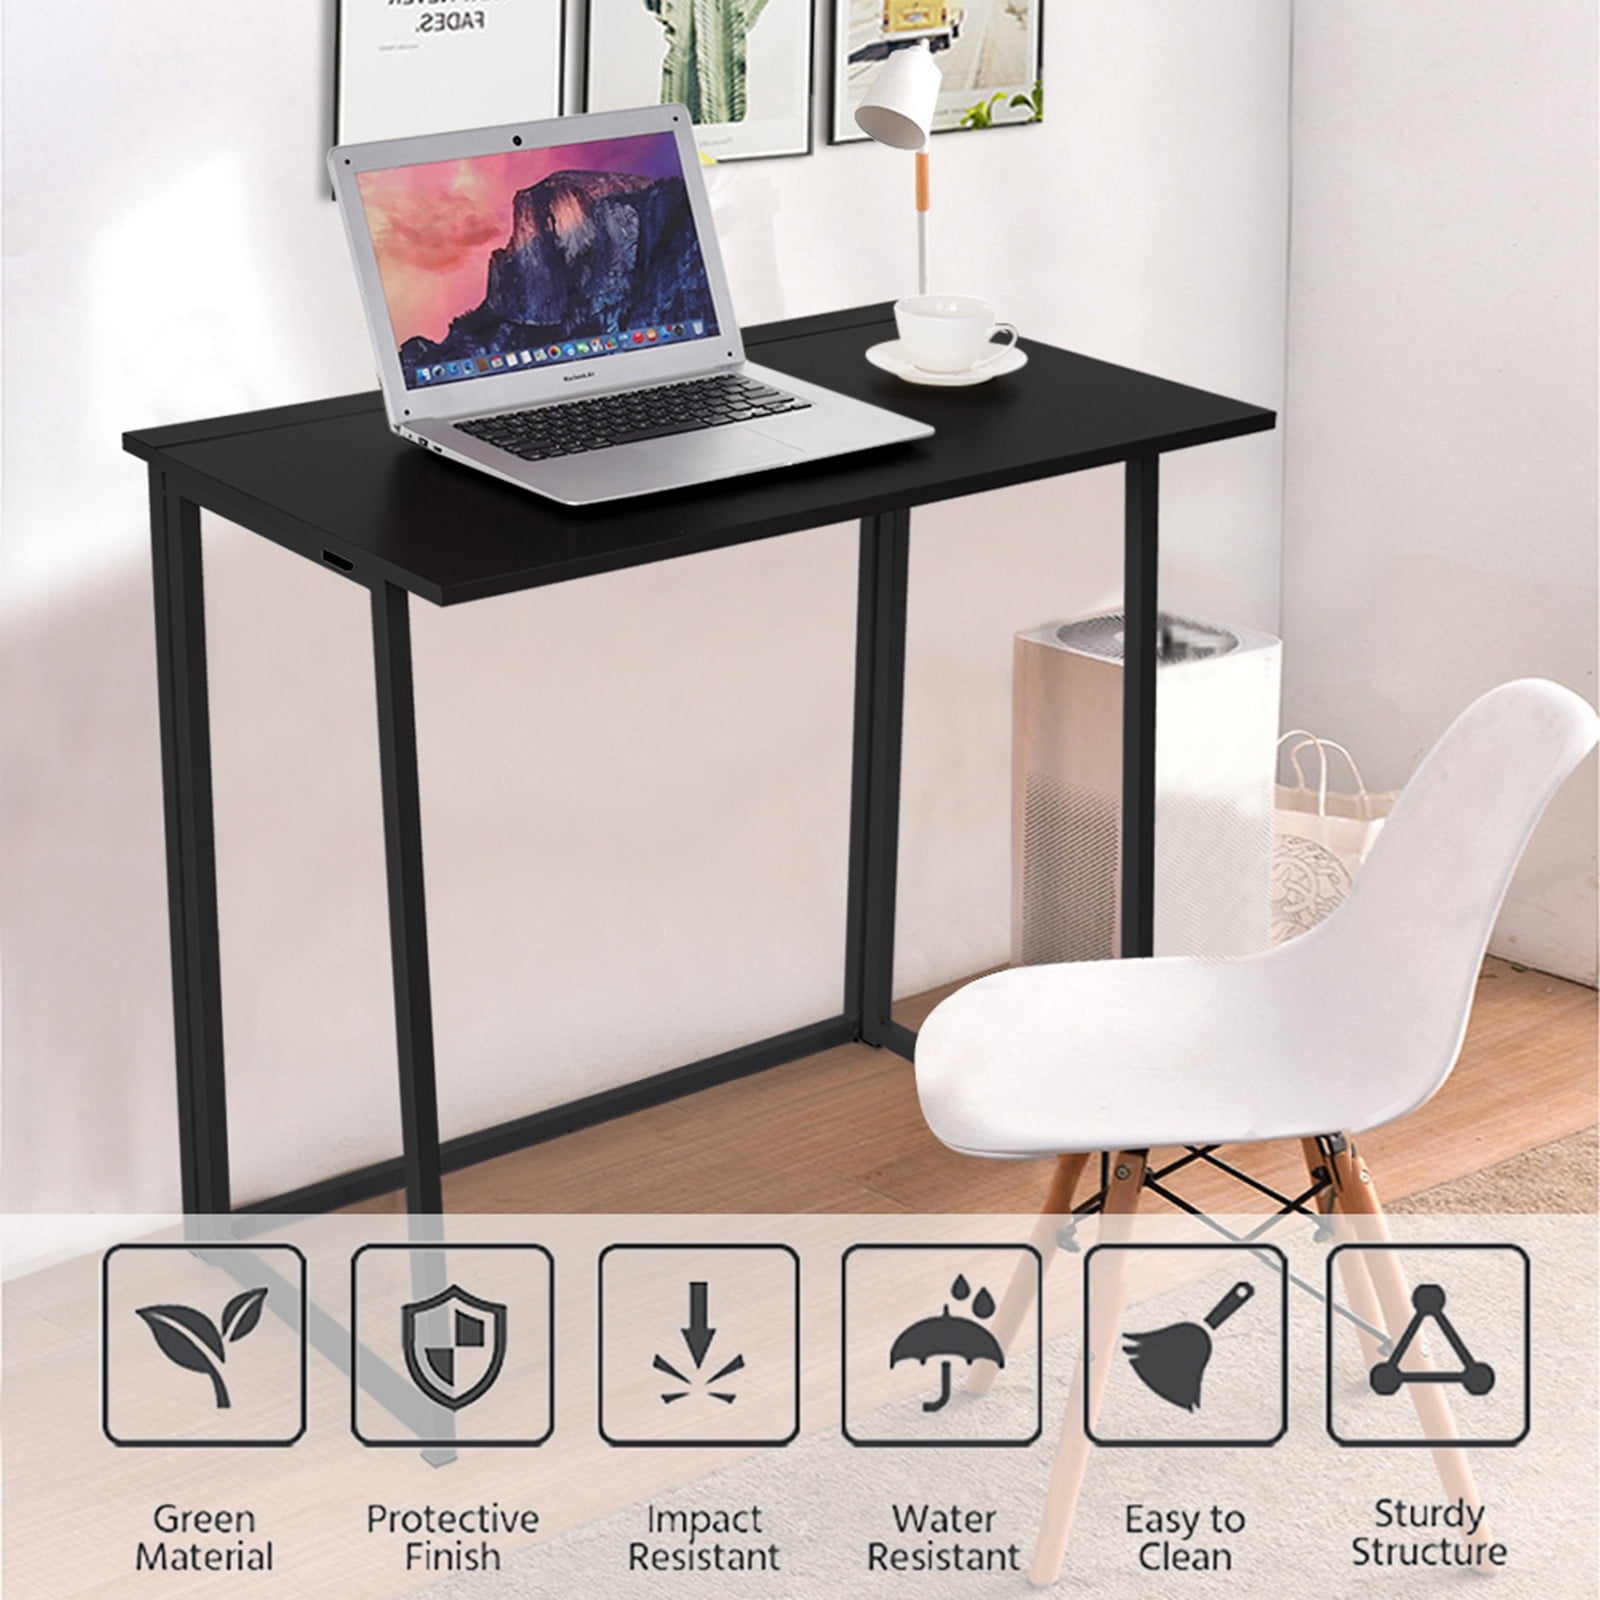 Details about   Folding Study Desk For Small Space Home /Office Desk Simple Laptop Writing Table 